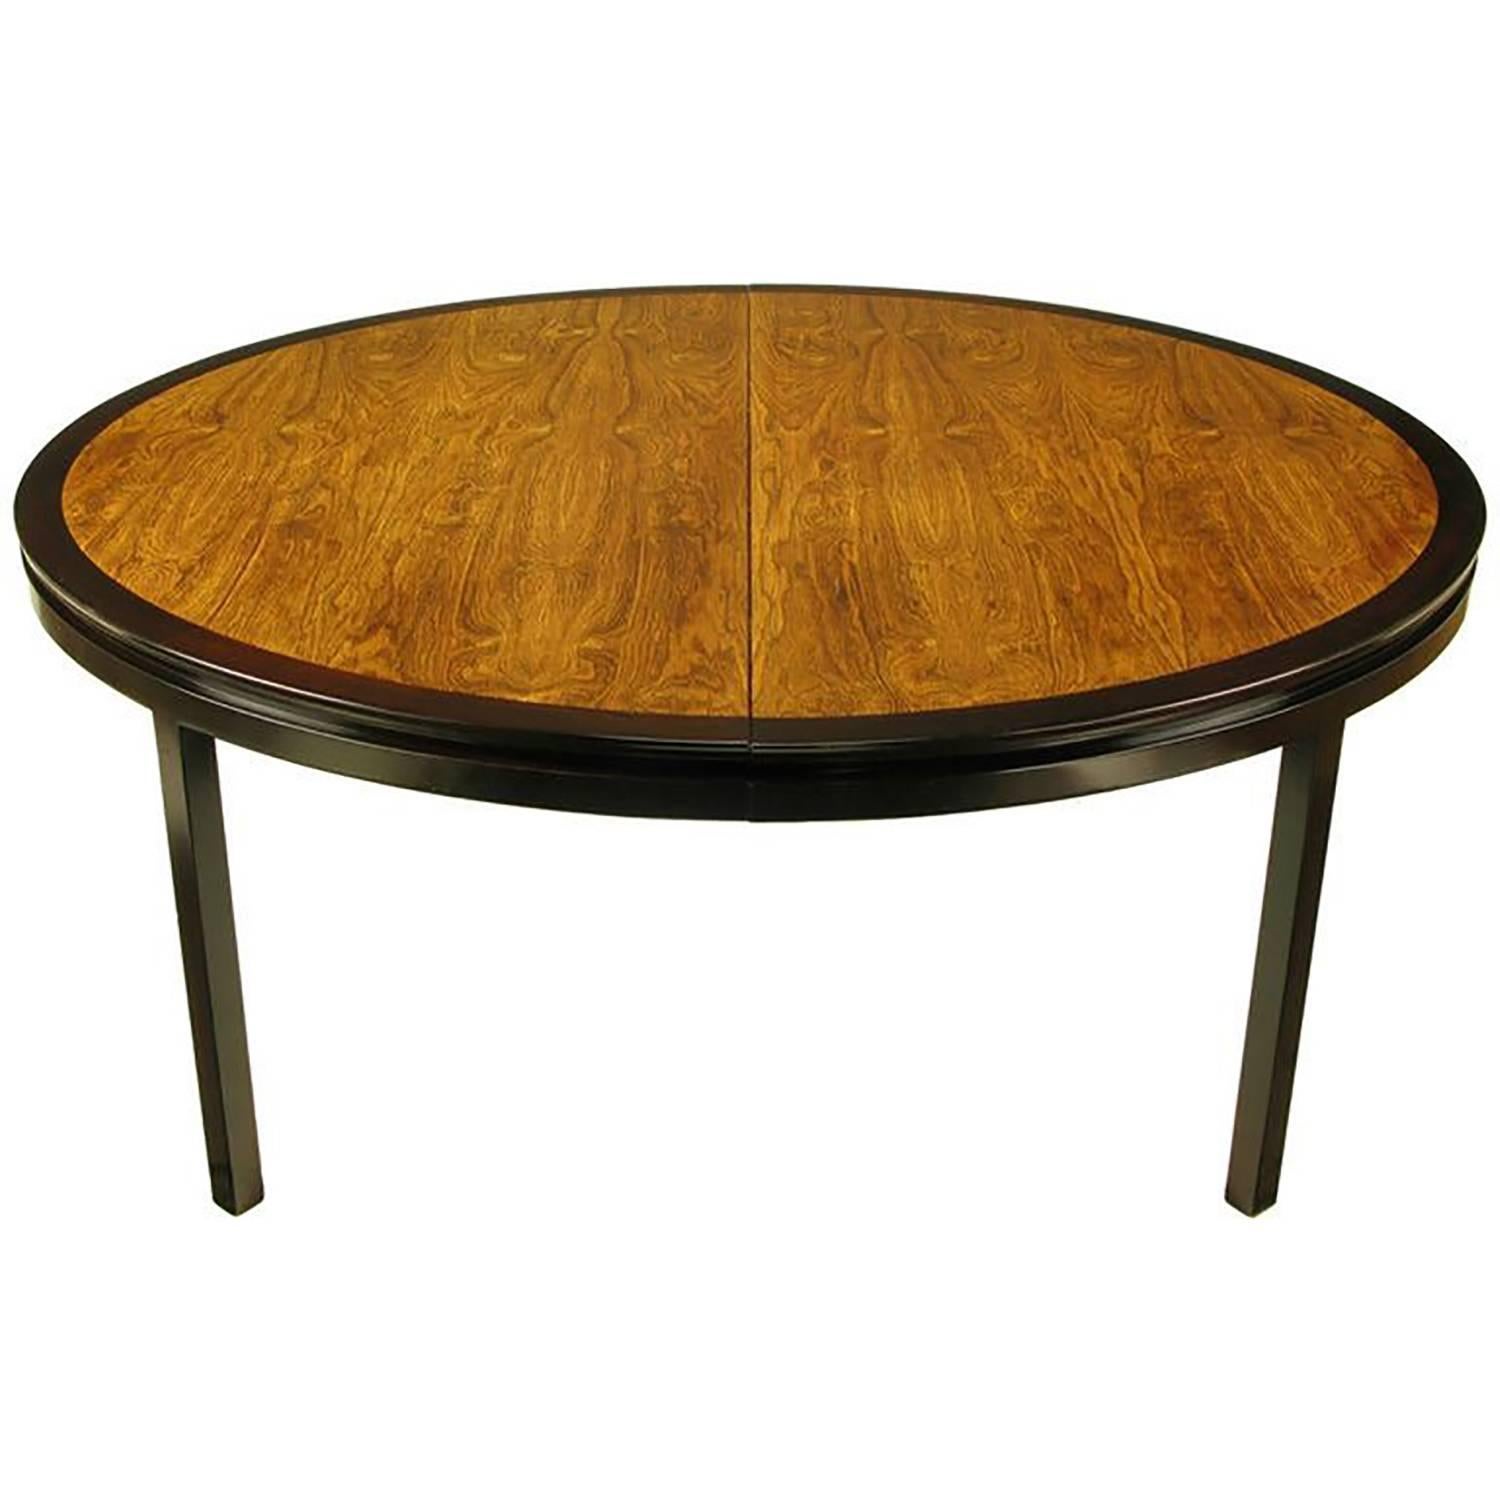 Mid-20th Century Rare Edward Wormley Custom Mahogany and Natural Rosewood Oval Dining Table For Sale